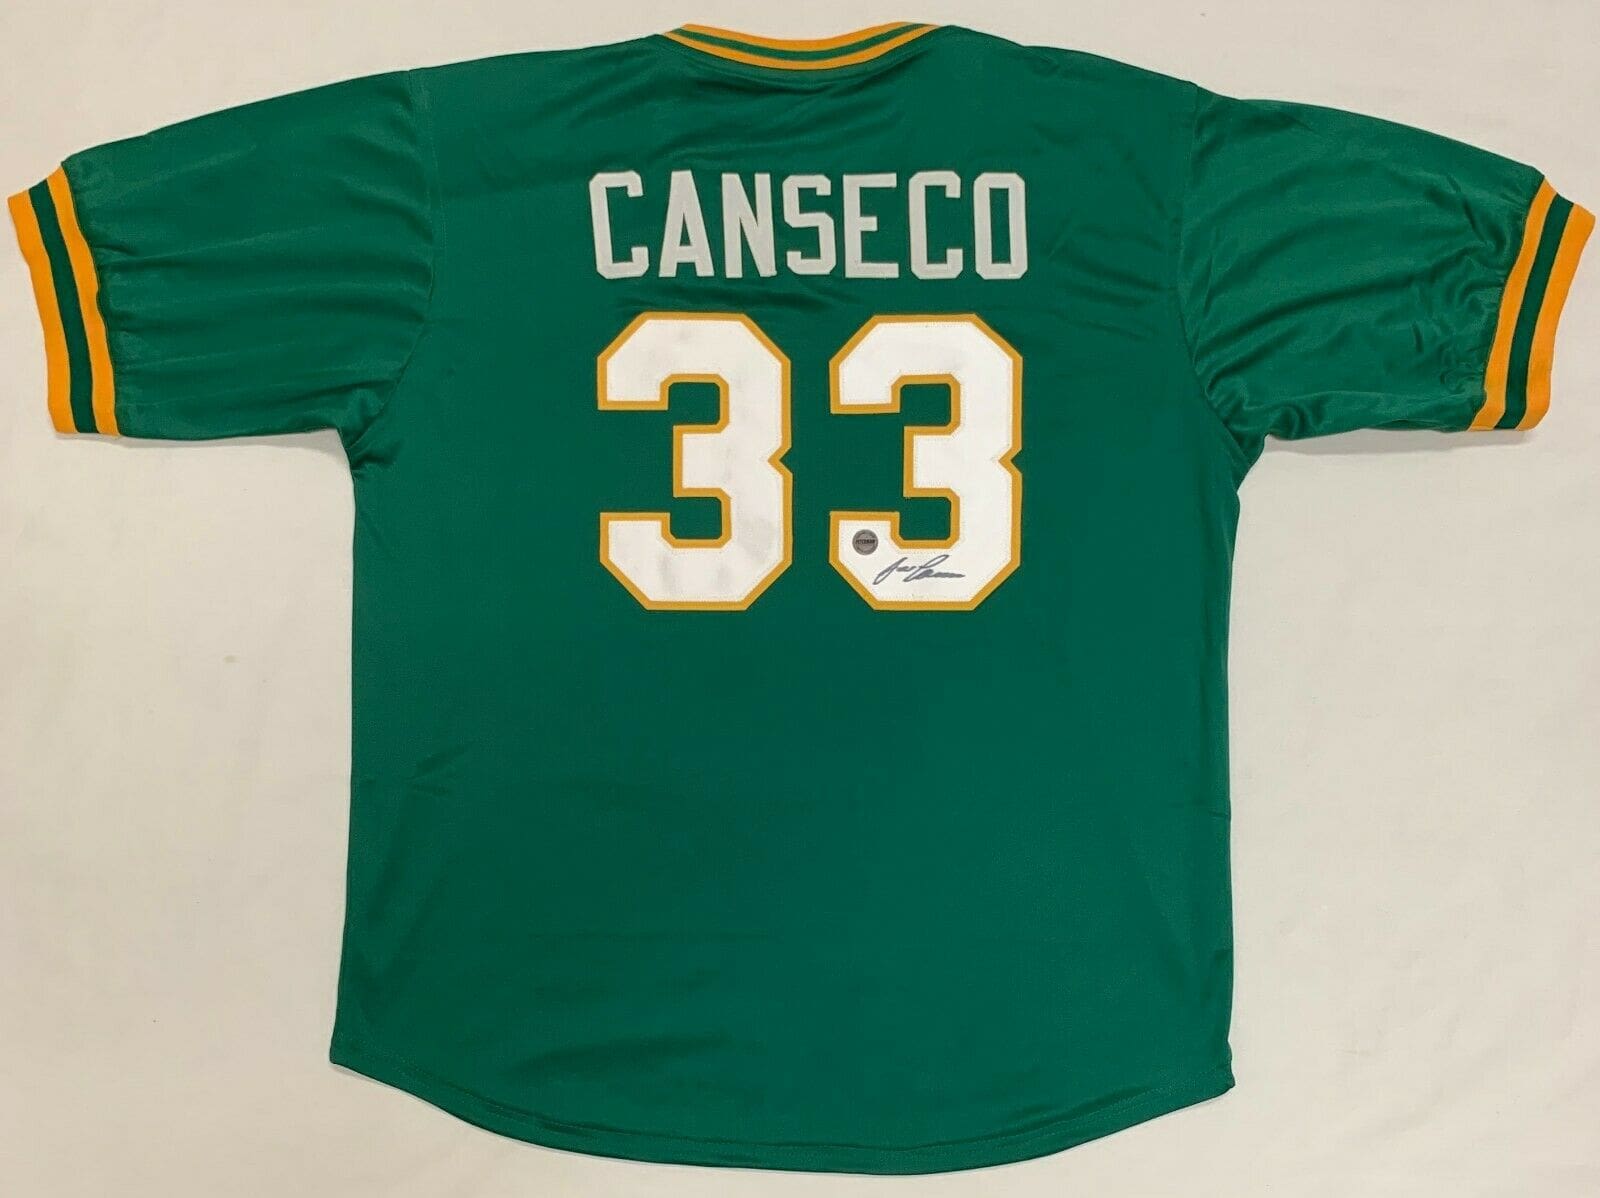 Jose Canseco Signed Autographed Green Jersey FSG Authenticated